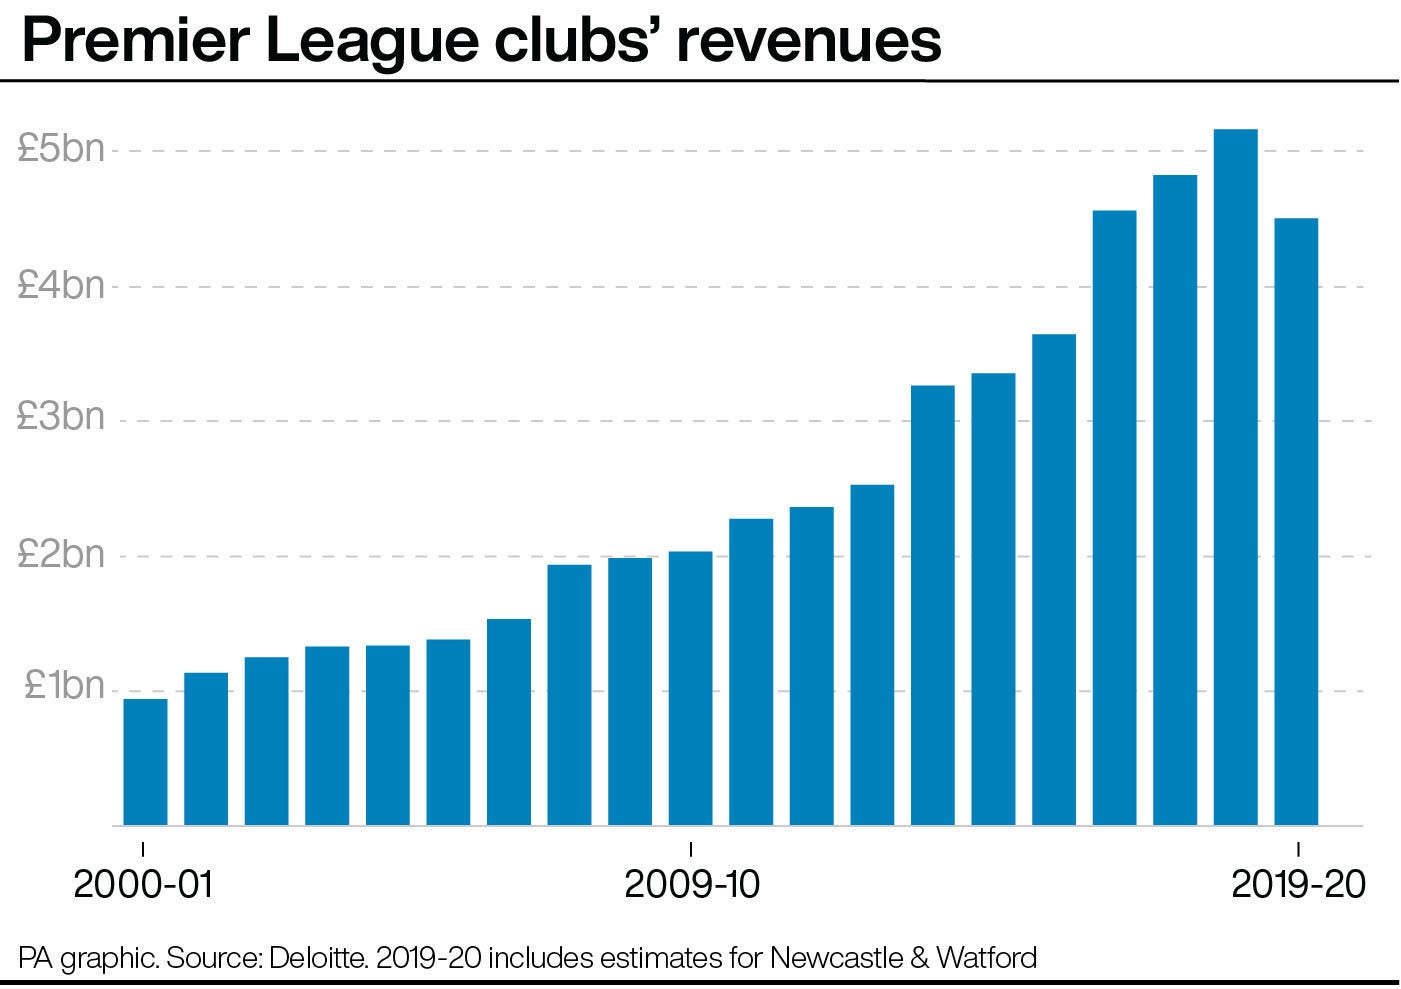 Premier League club revenues fell for the first time in 2019/2020 (PA graphic/Deloitte)